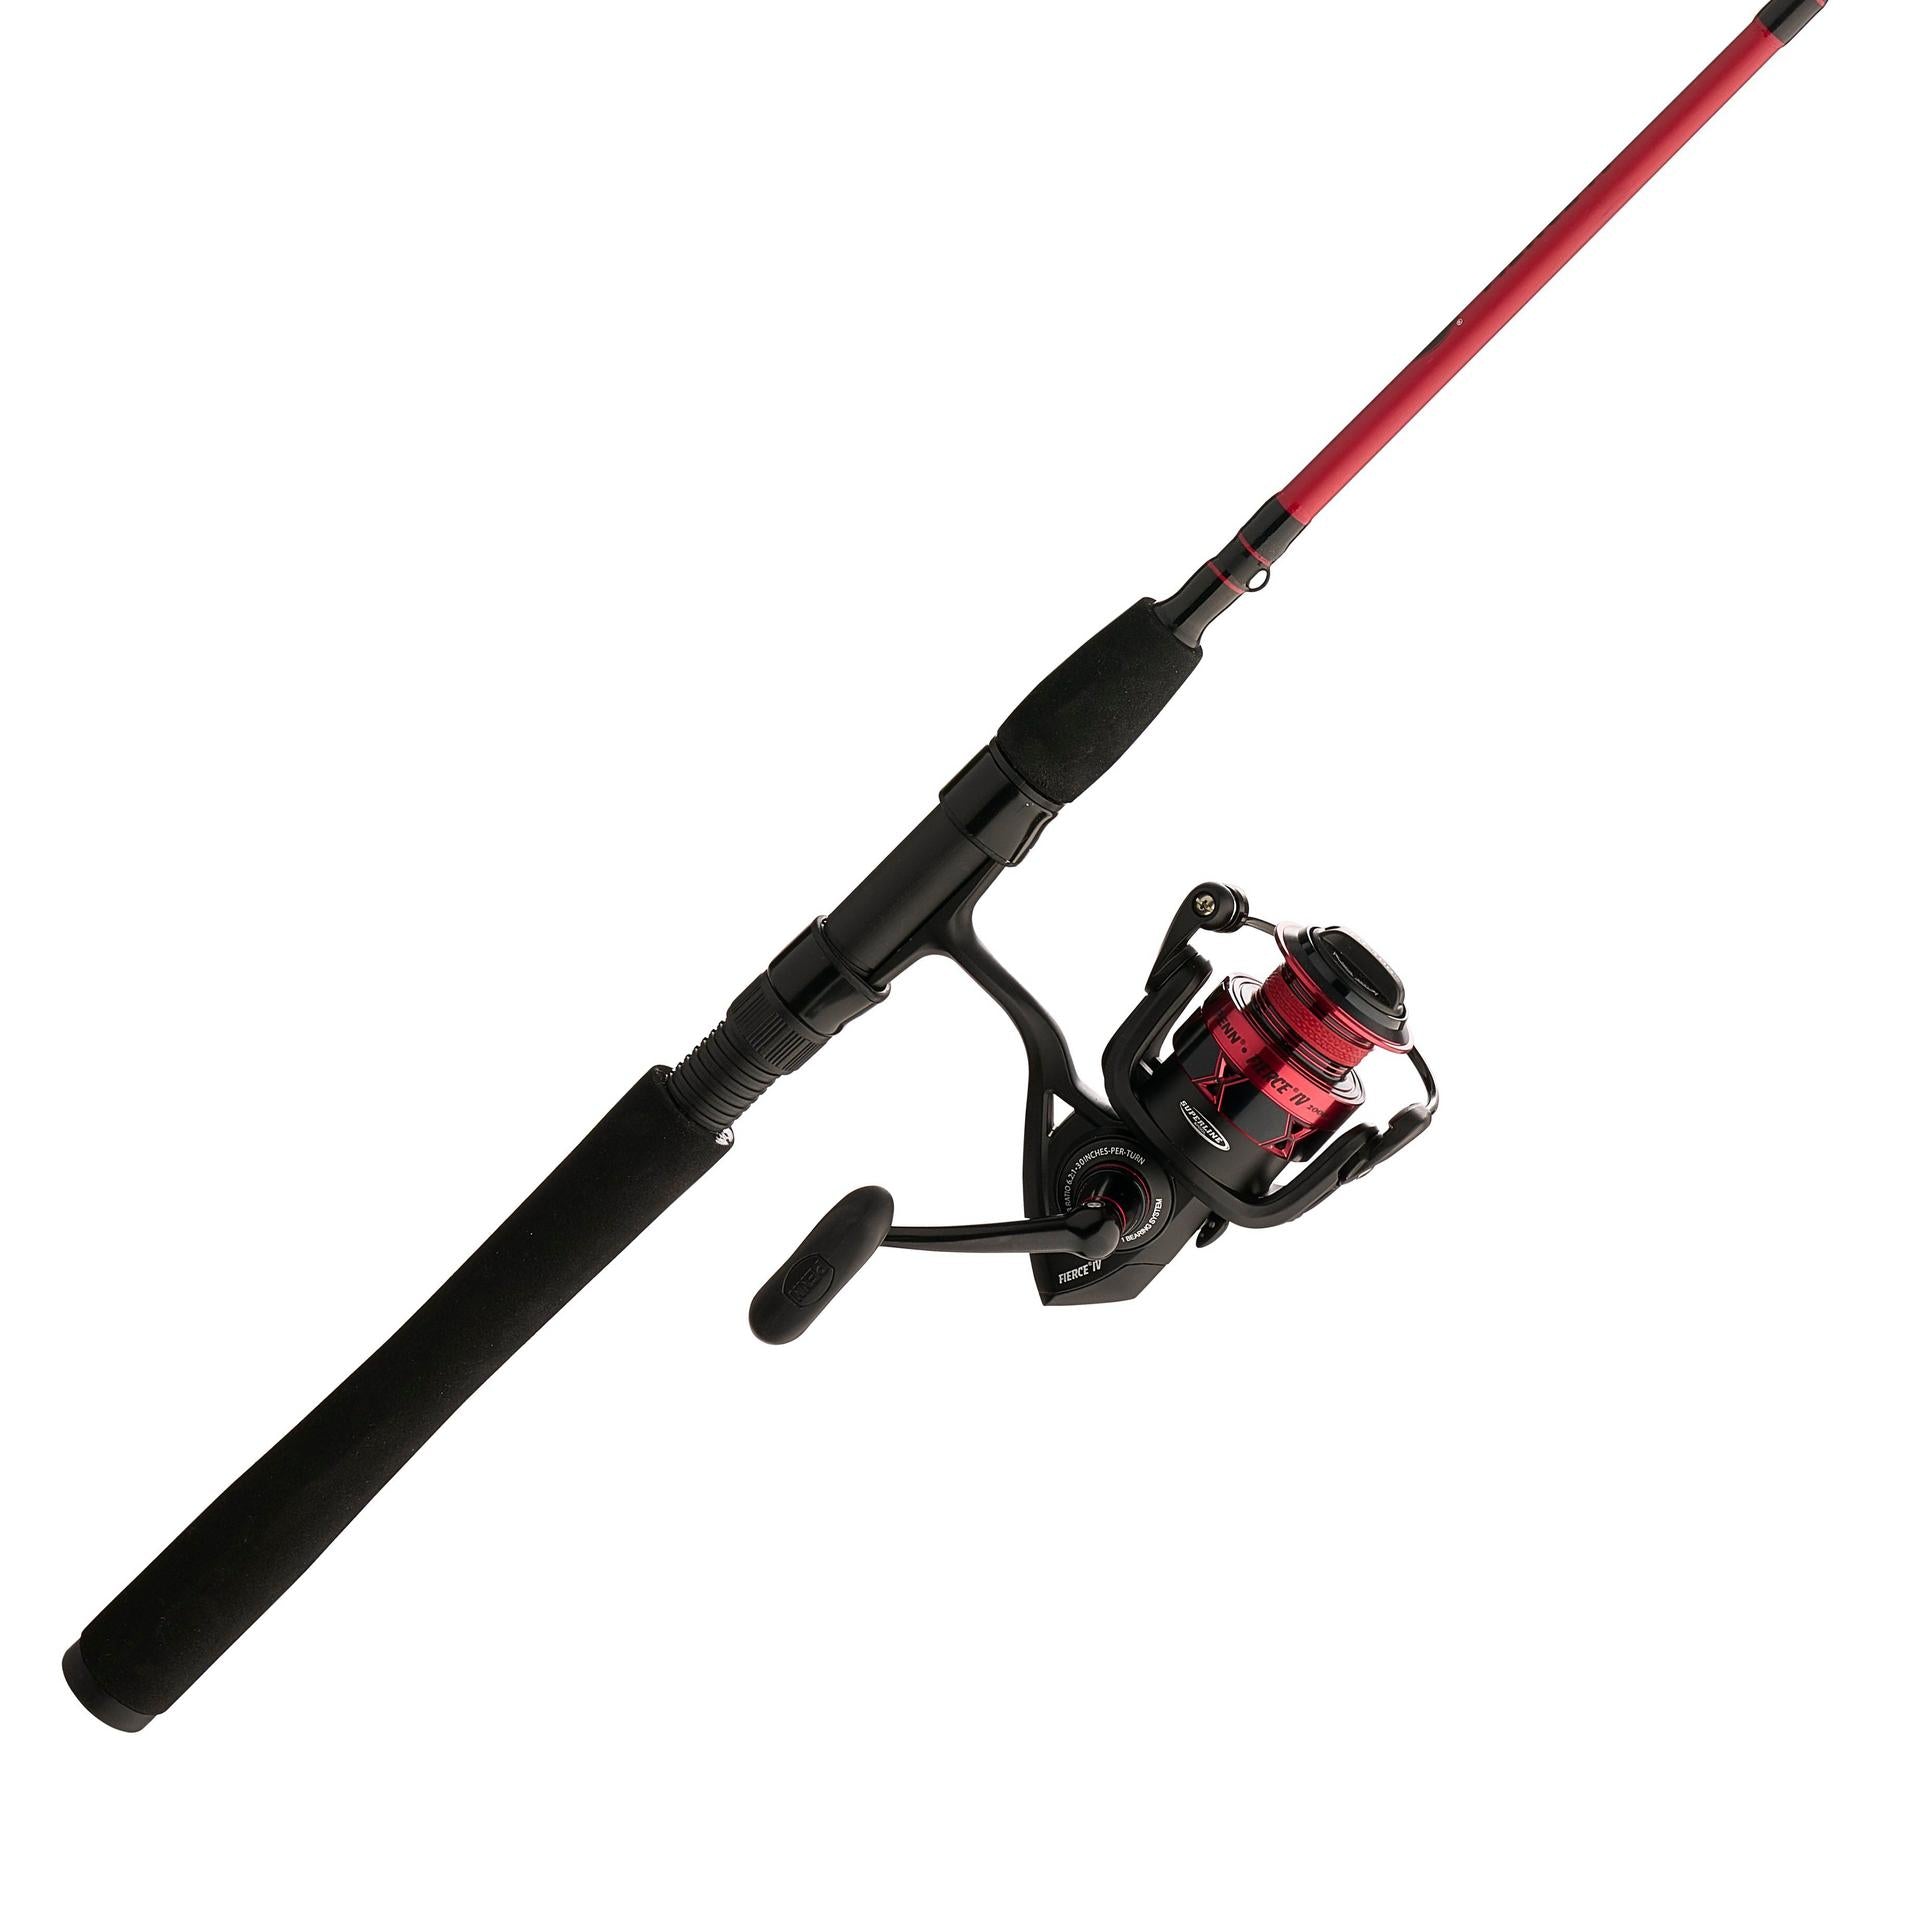 All Saltwater Spinning Combo Medium 6 ft 6 in Item Fishing Rod & Reel  Combos for sale